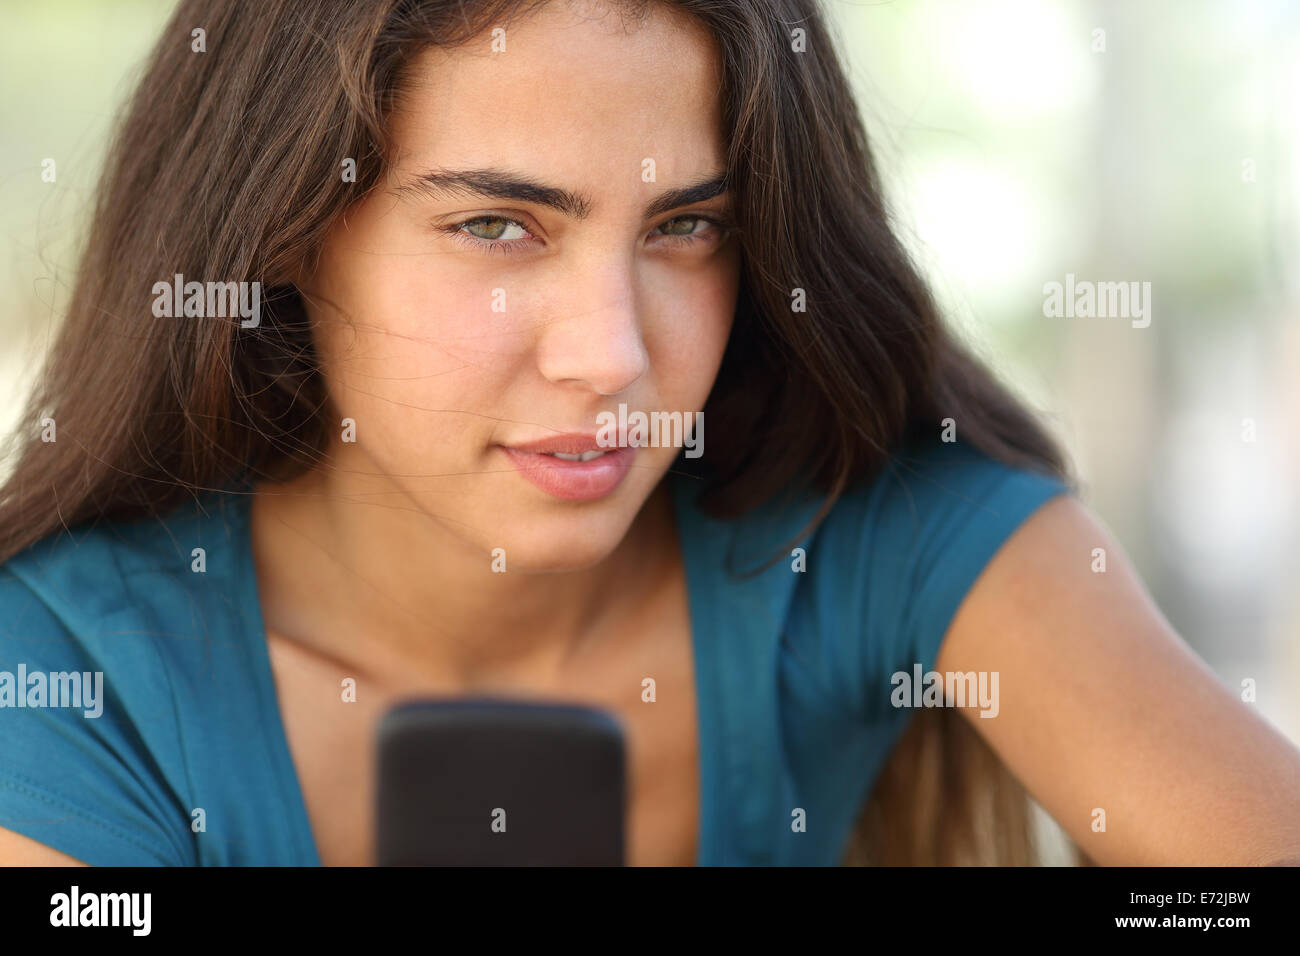 Portrait of a teen girl with a smart phone looking at camera Stock Photo